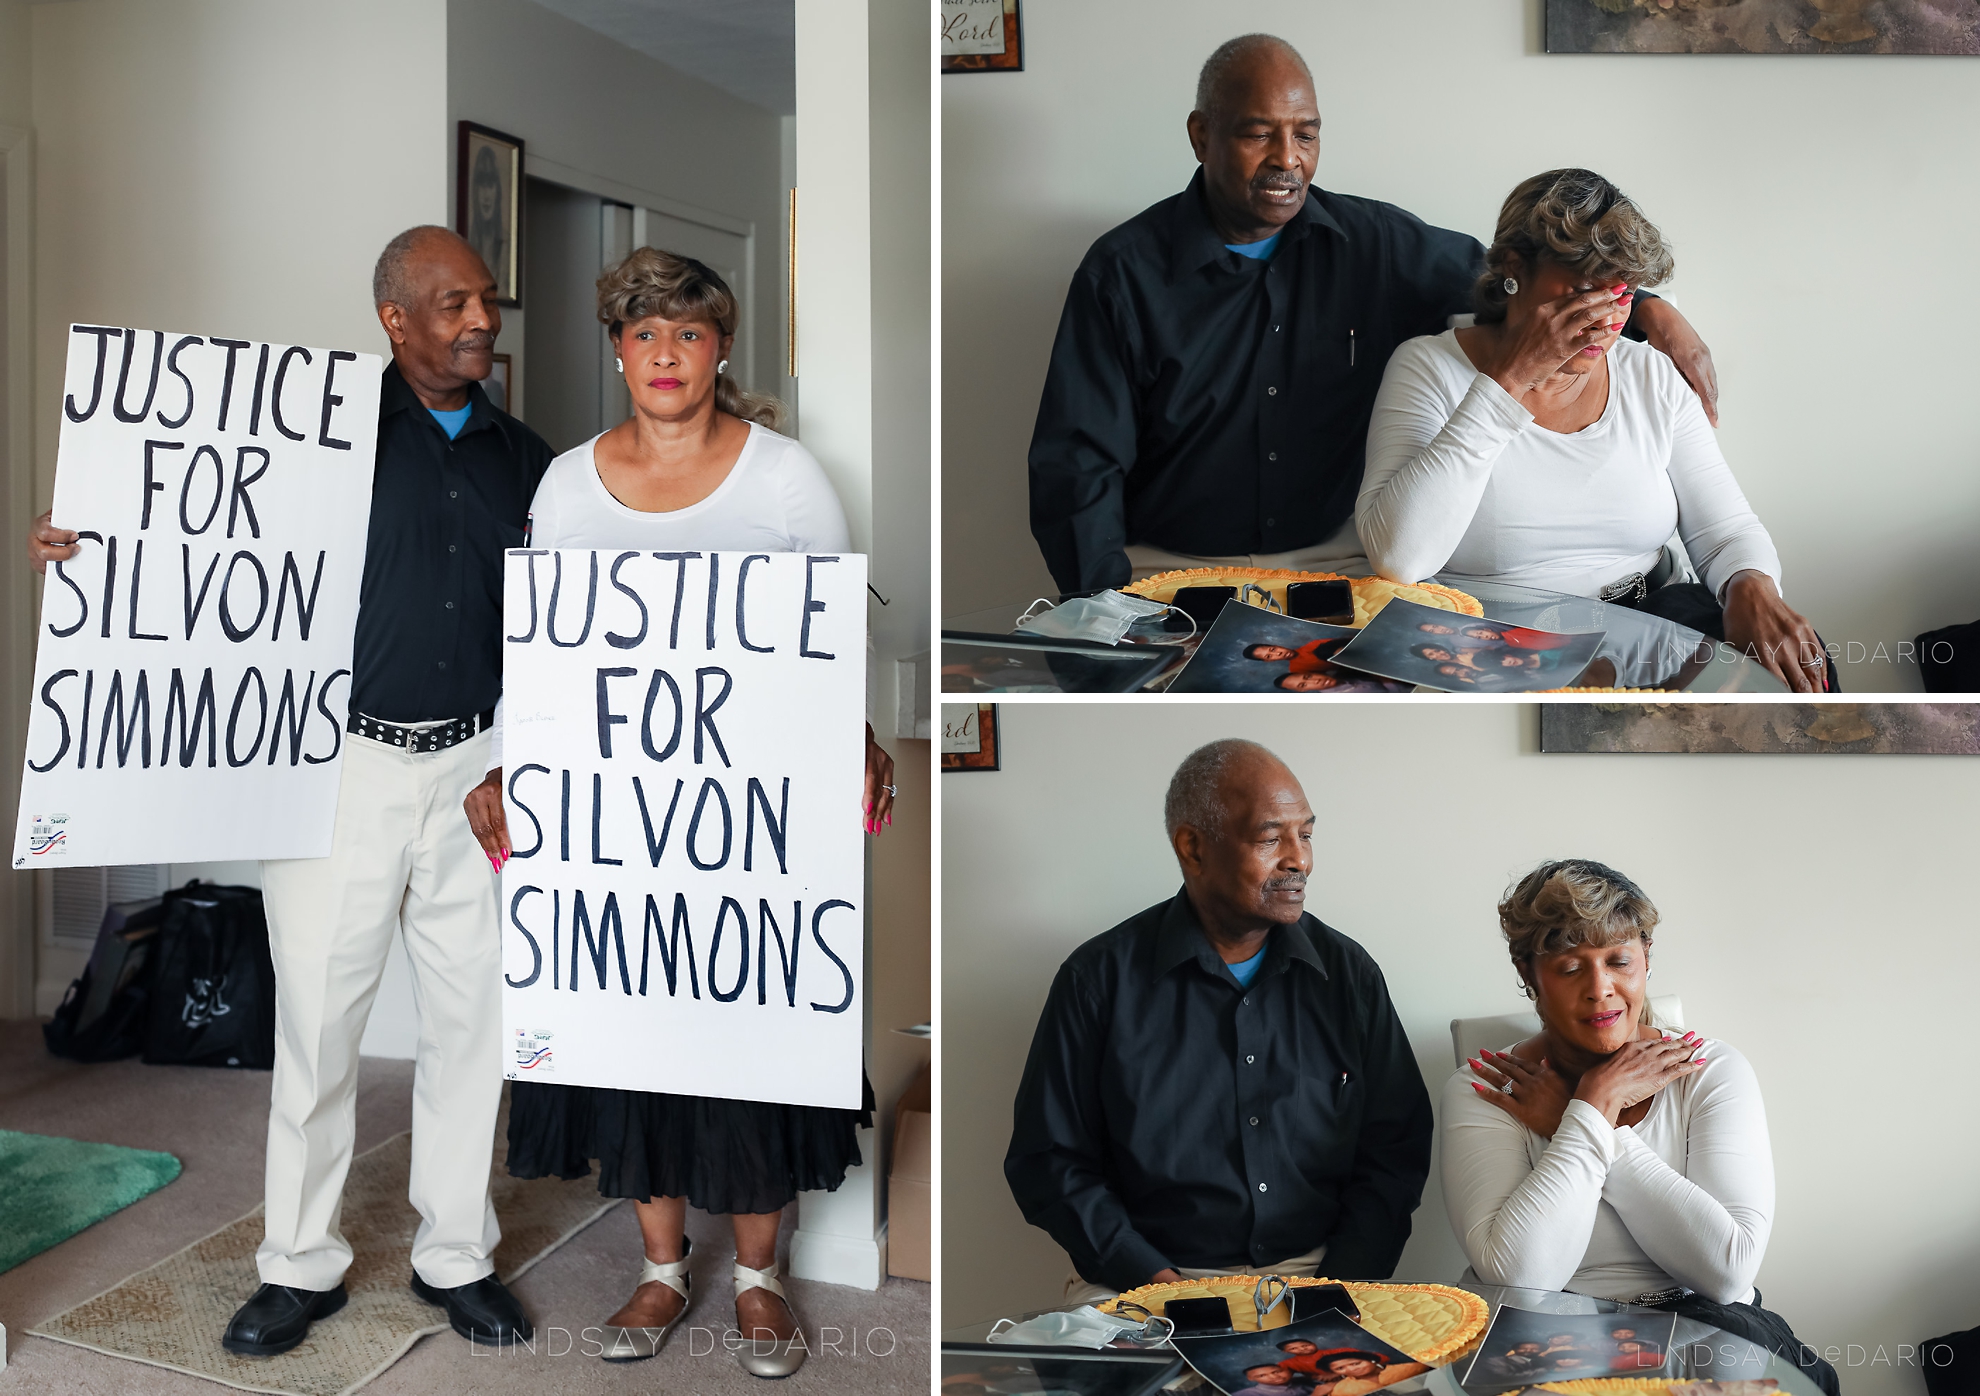 Frank and Sharlene Simmons, parents of Silvon Simmons, during a Reuters interview in their home in Rochester, NY